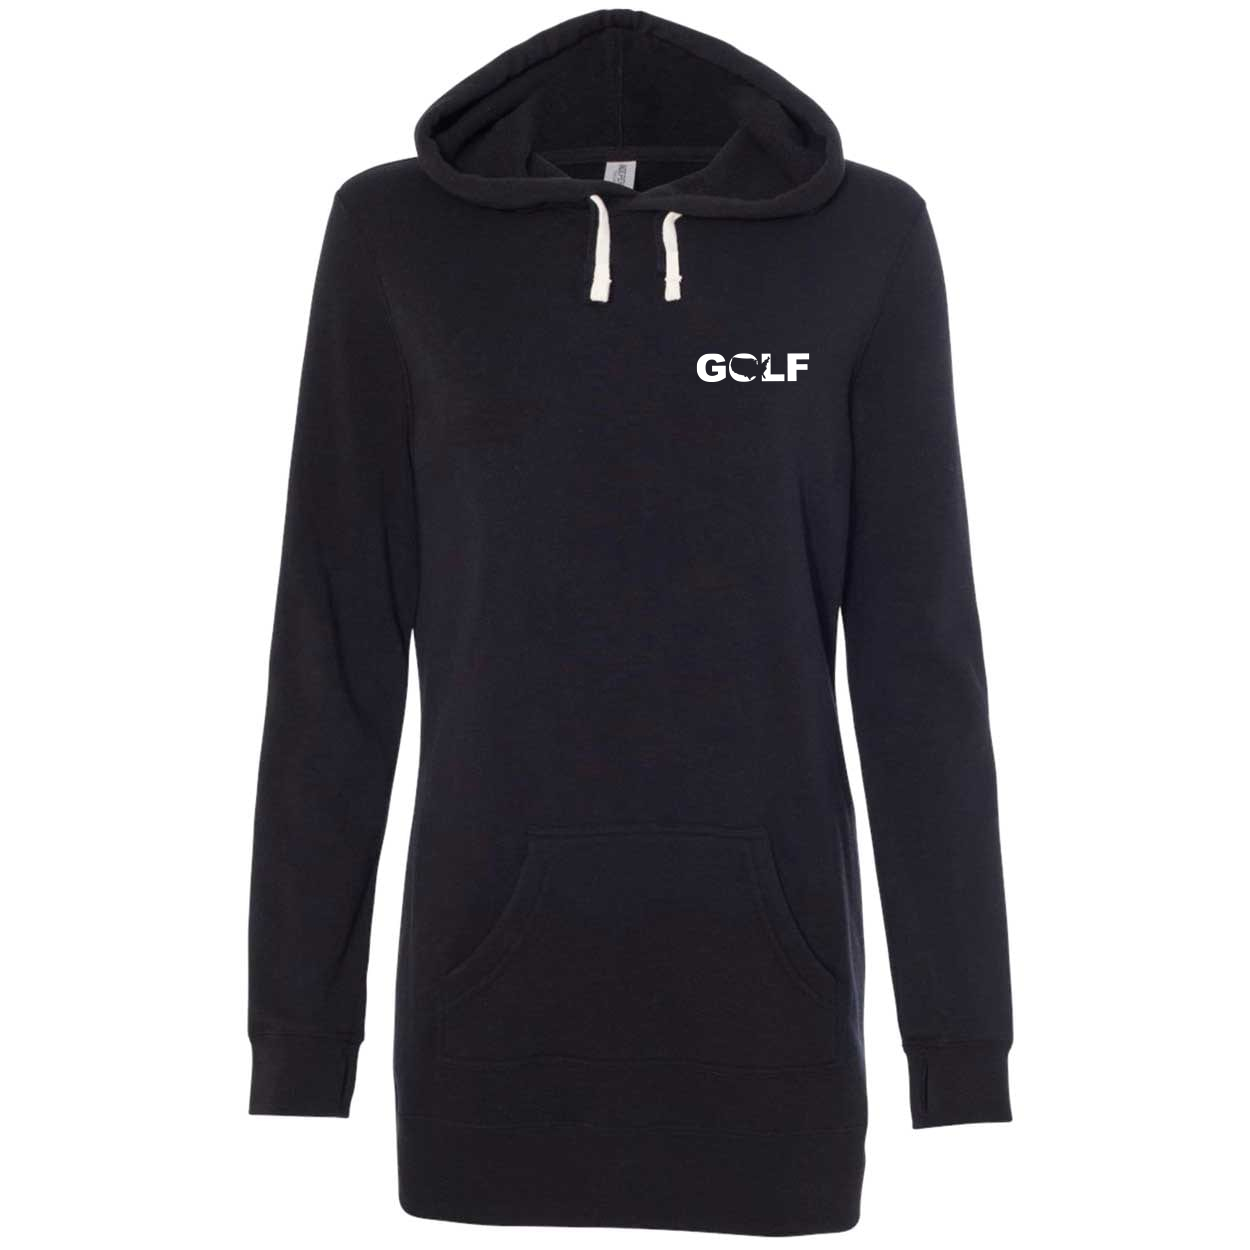 Golf United States Night Out Womens Pullover Hooded Sweatshirt Dress Black (White Logo)